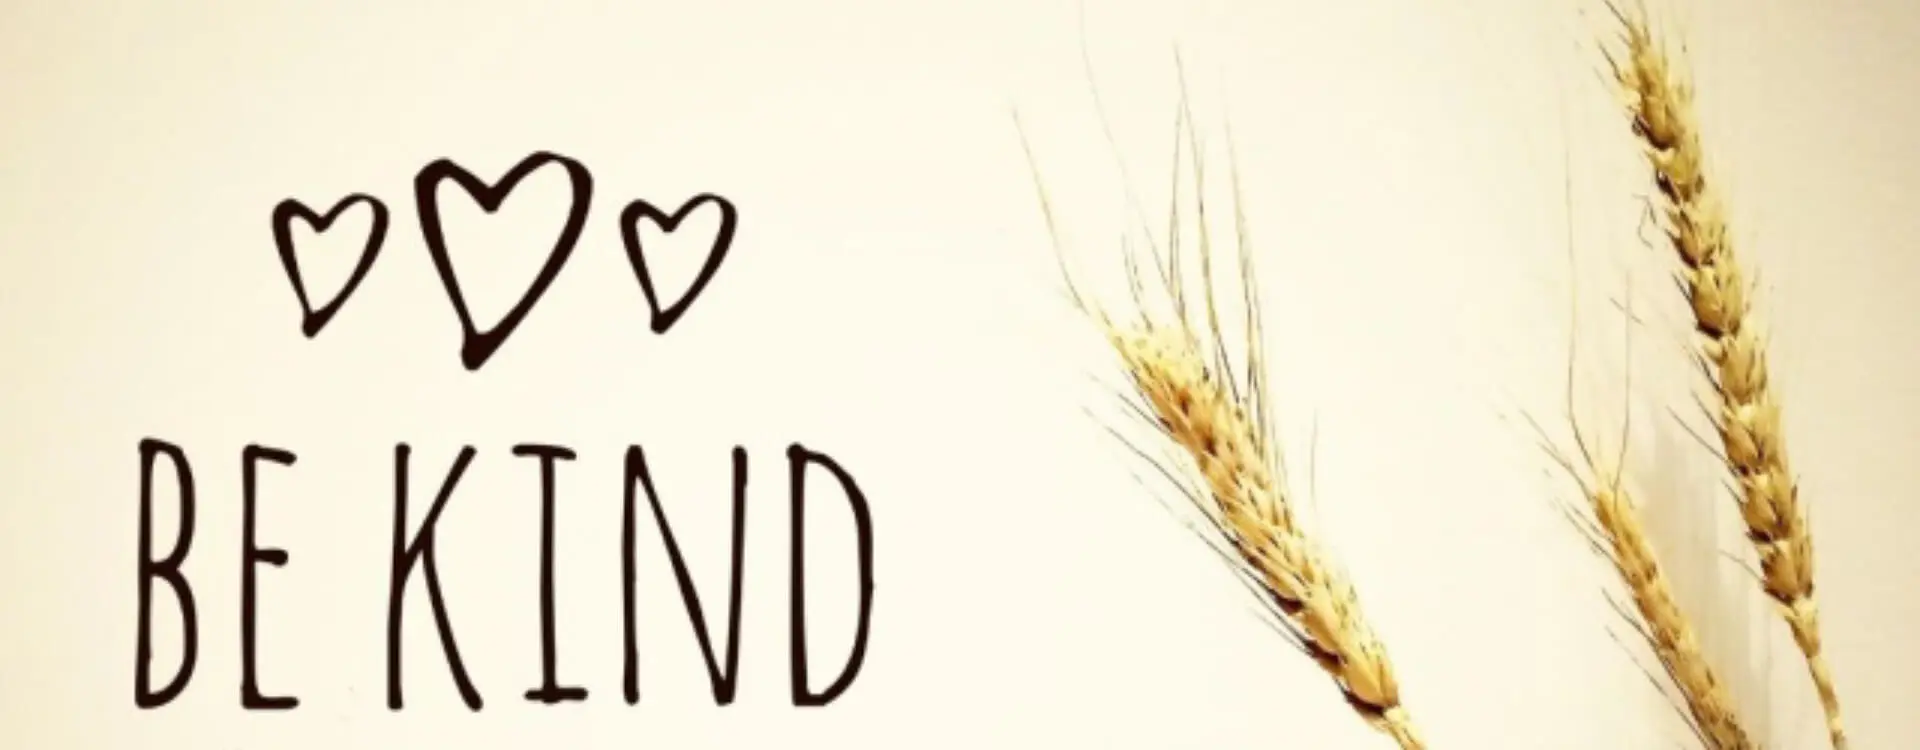 Three hand drawn hearts, with the words "Be Kind" underneath. Three pieces of wheat on the right side of the photo.